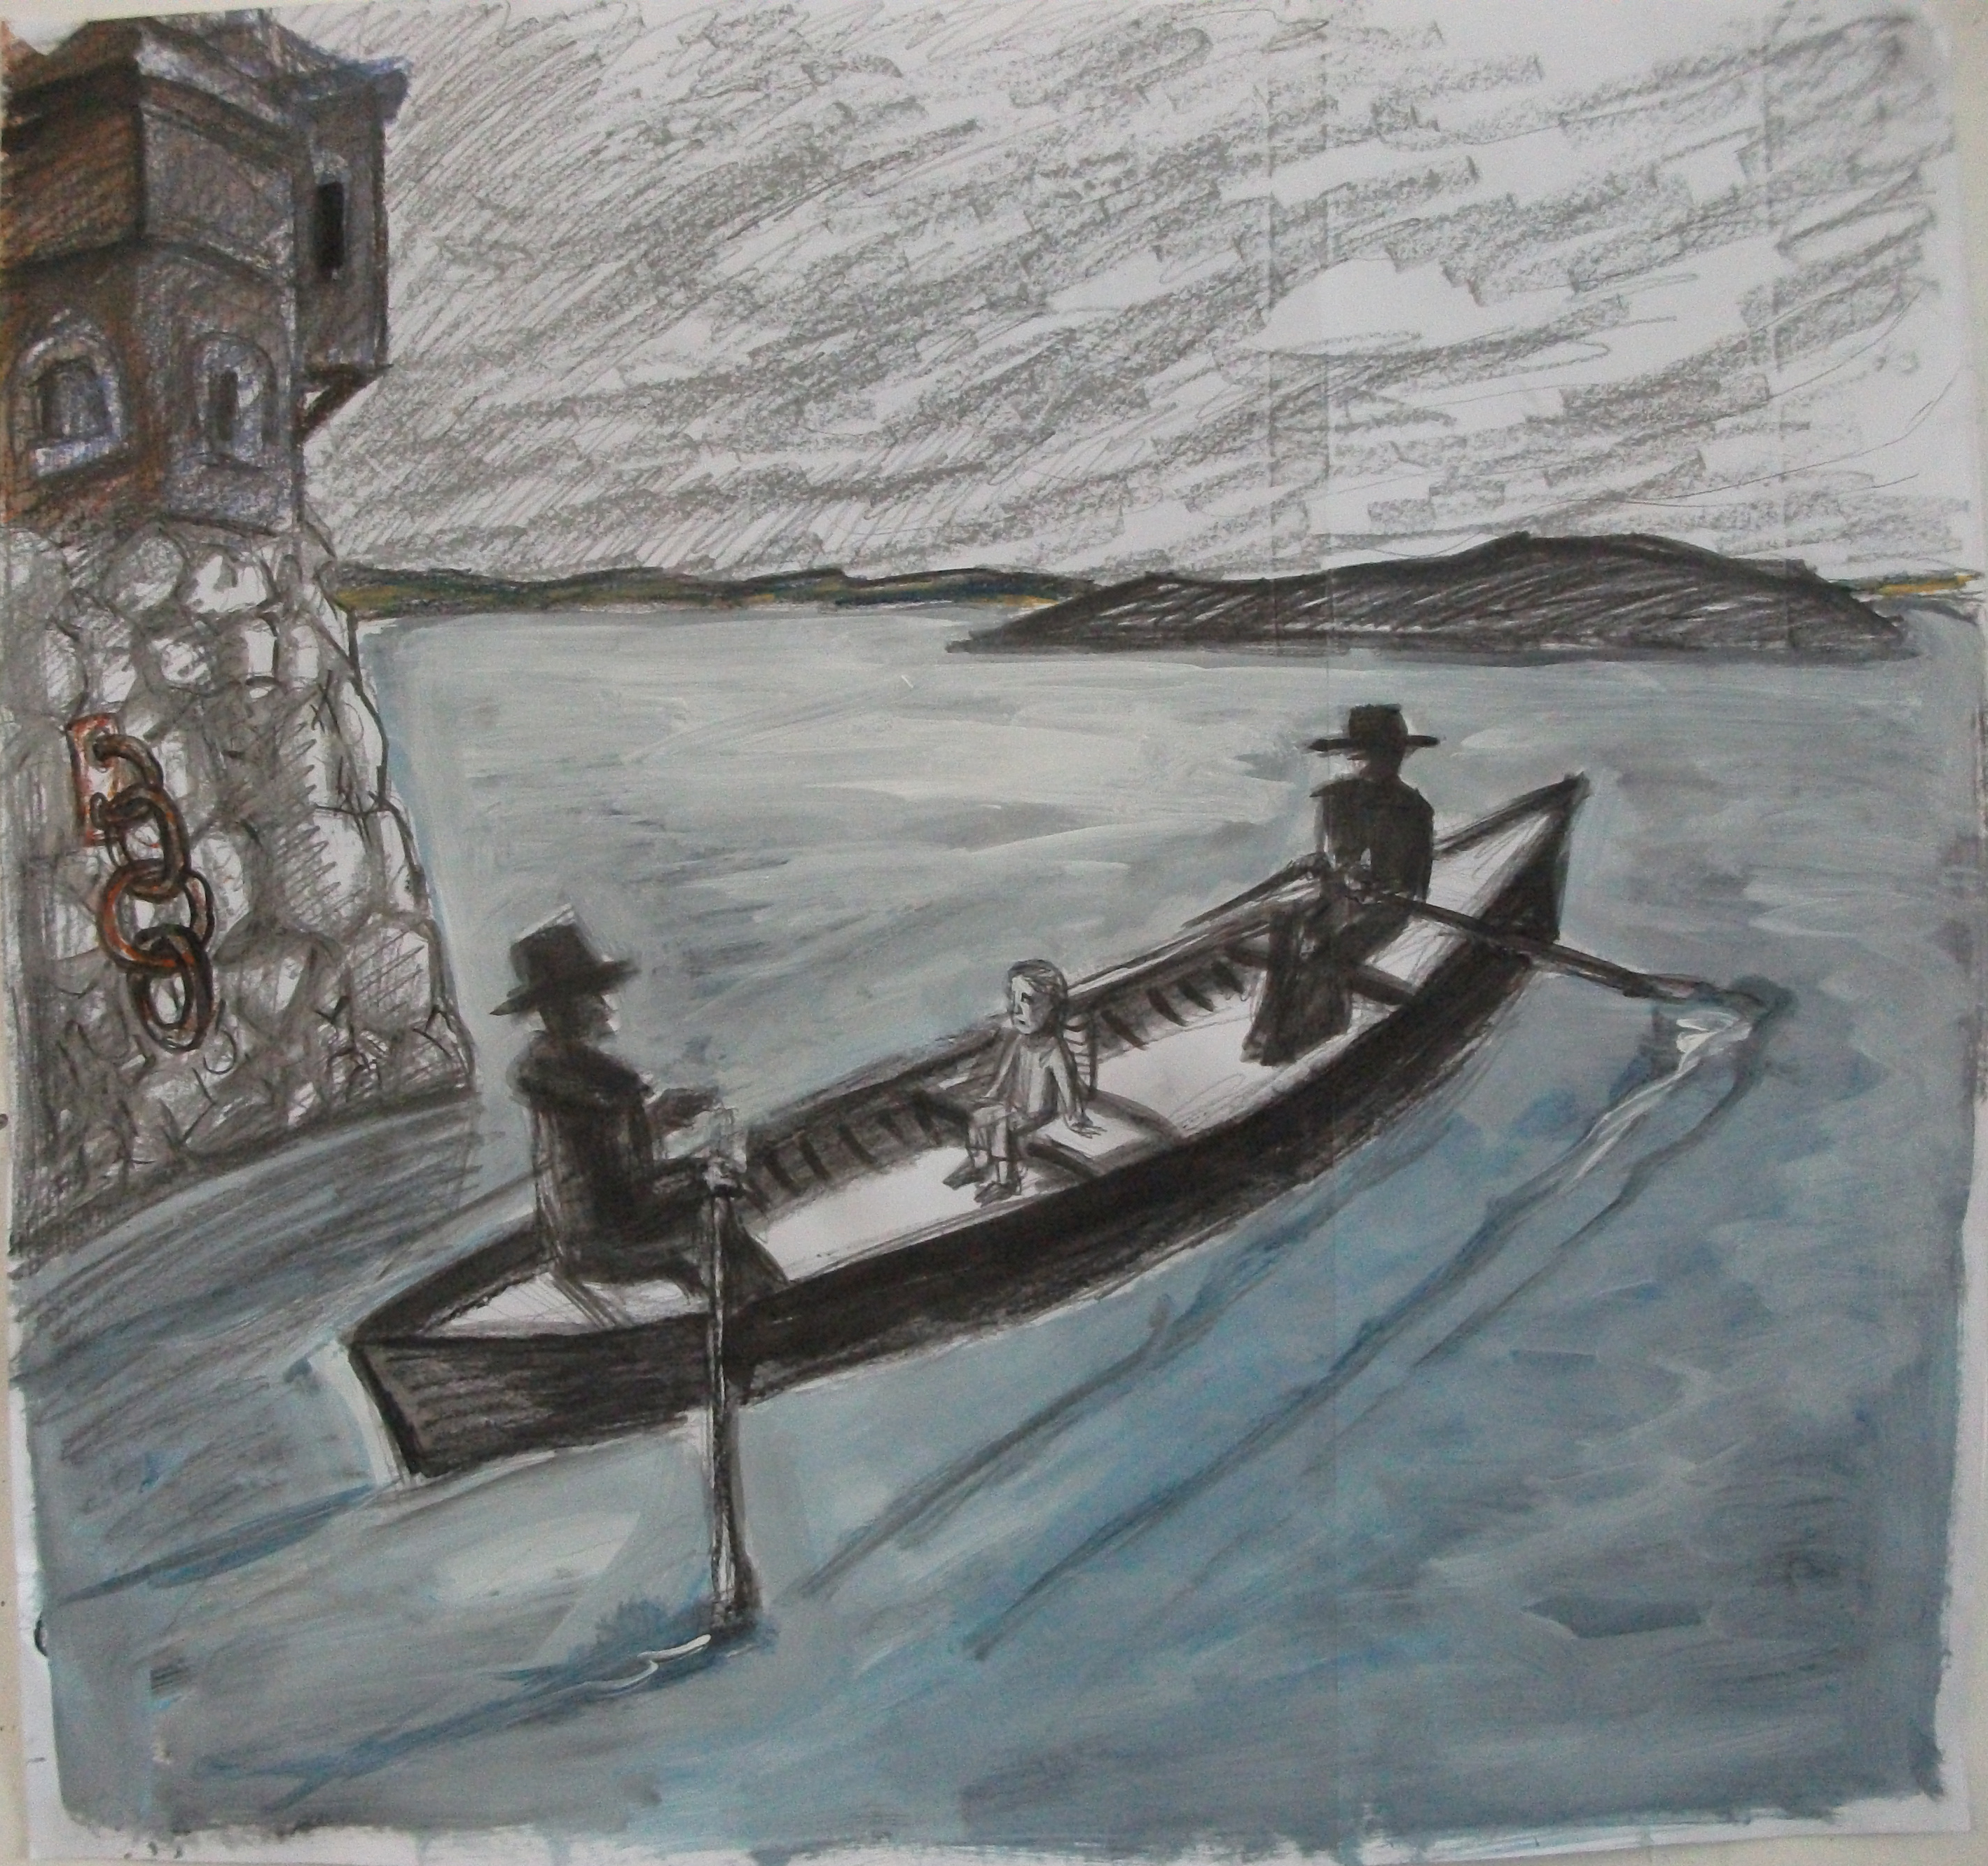 Two shadowy figures row a young child off in a boat.